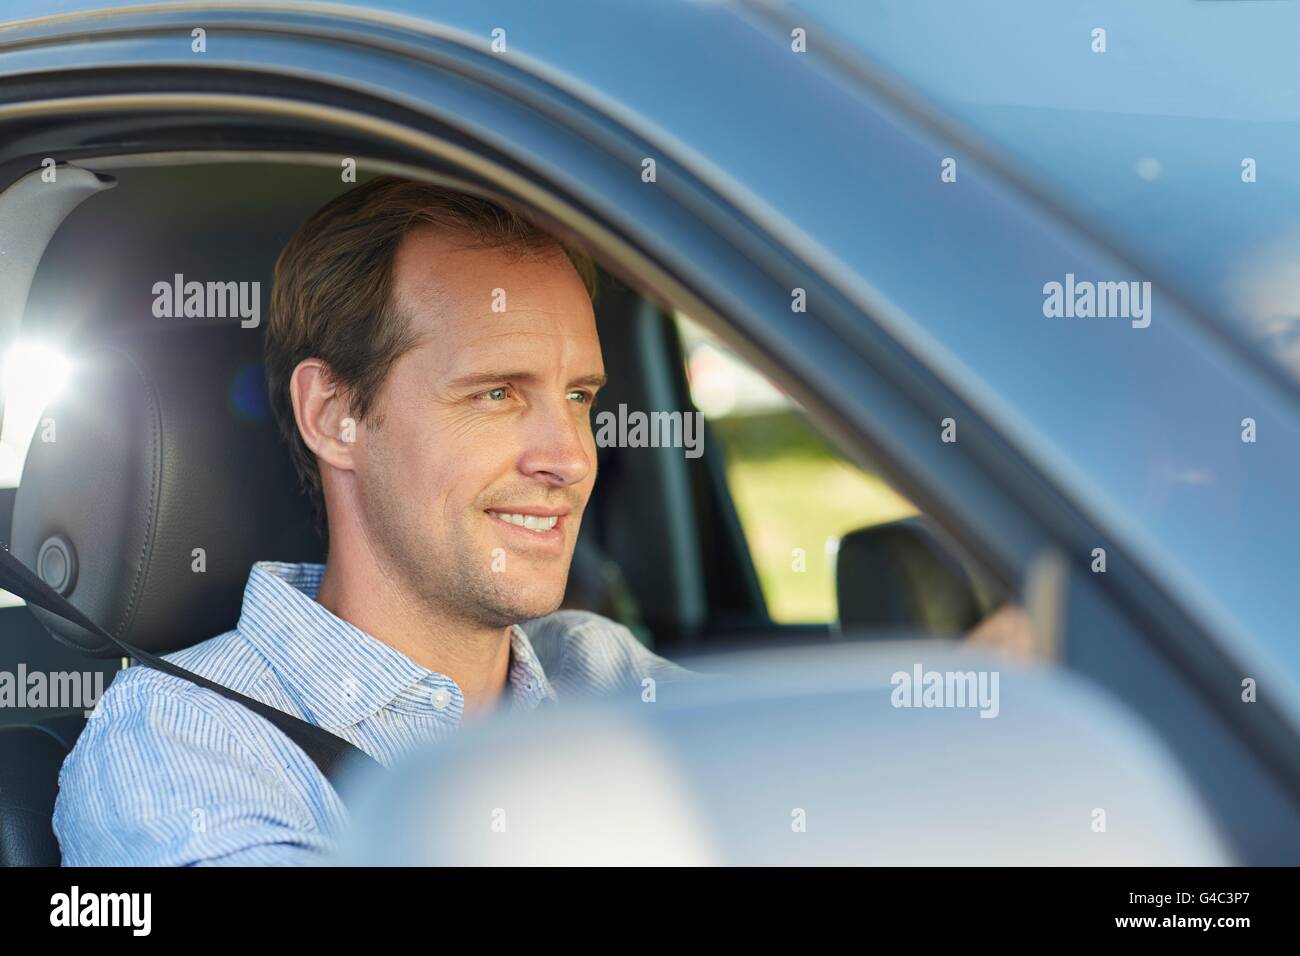 MODEL RELEASED. Mid adult man in car, smiling. Stock Photo